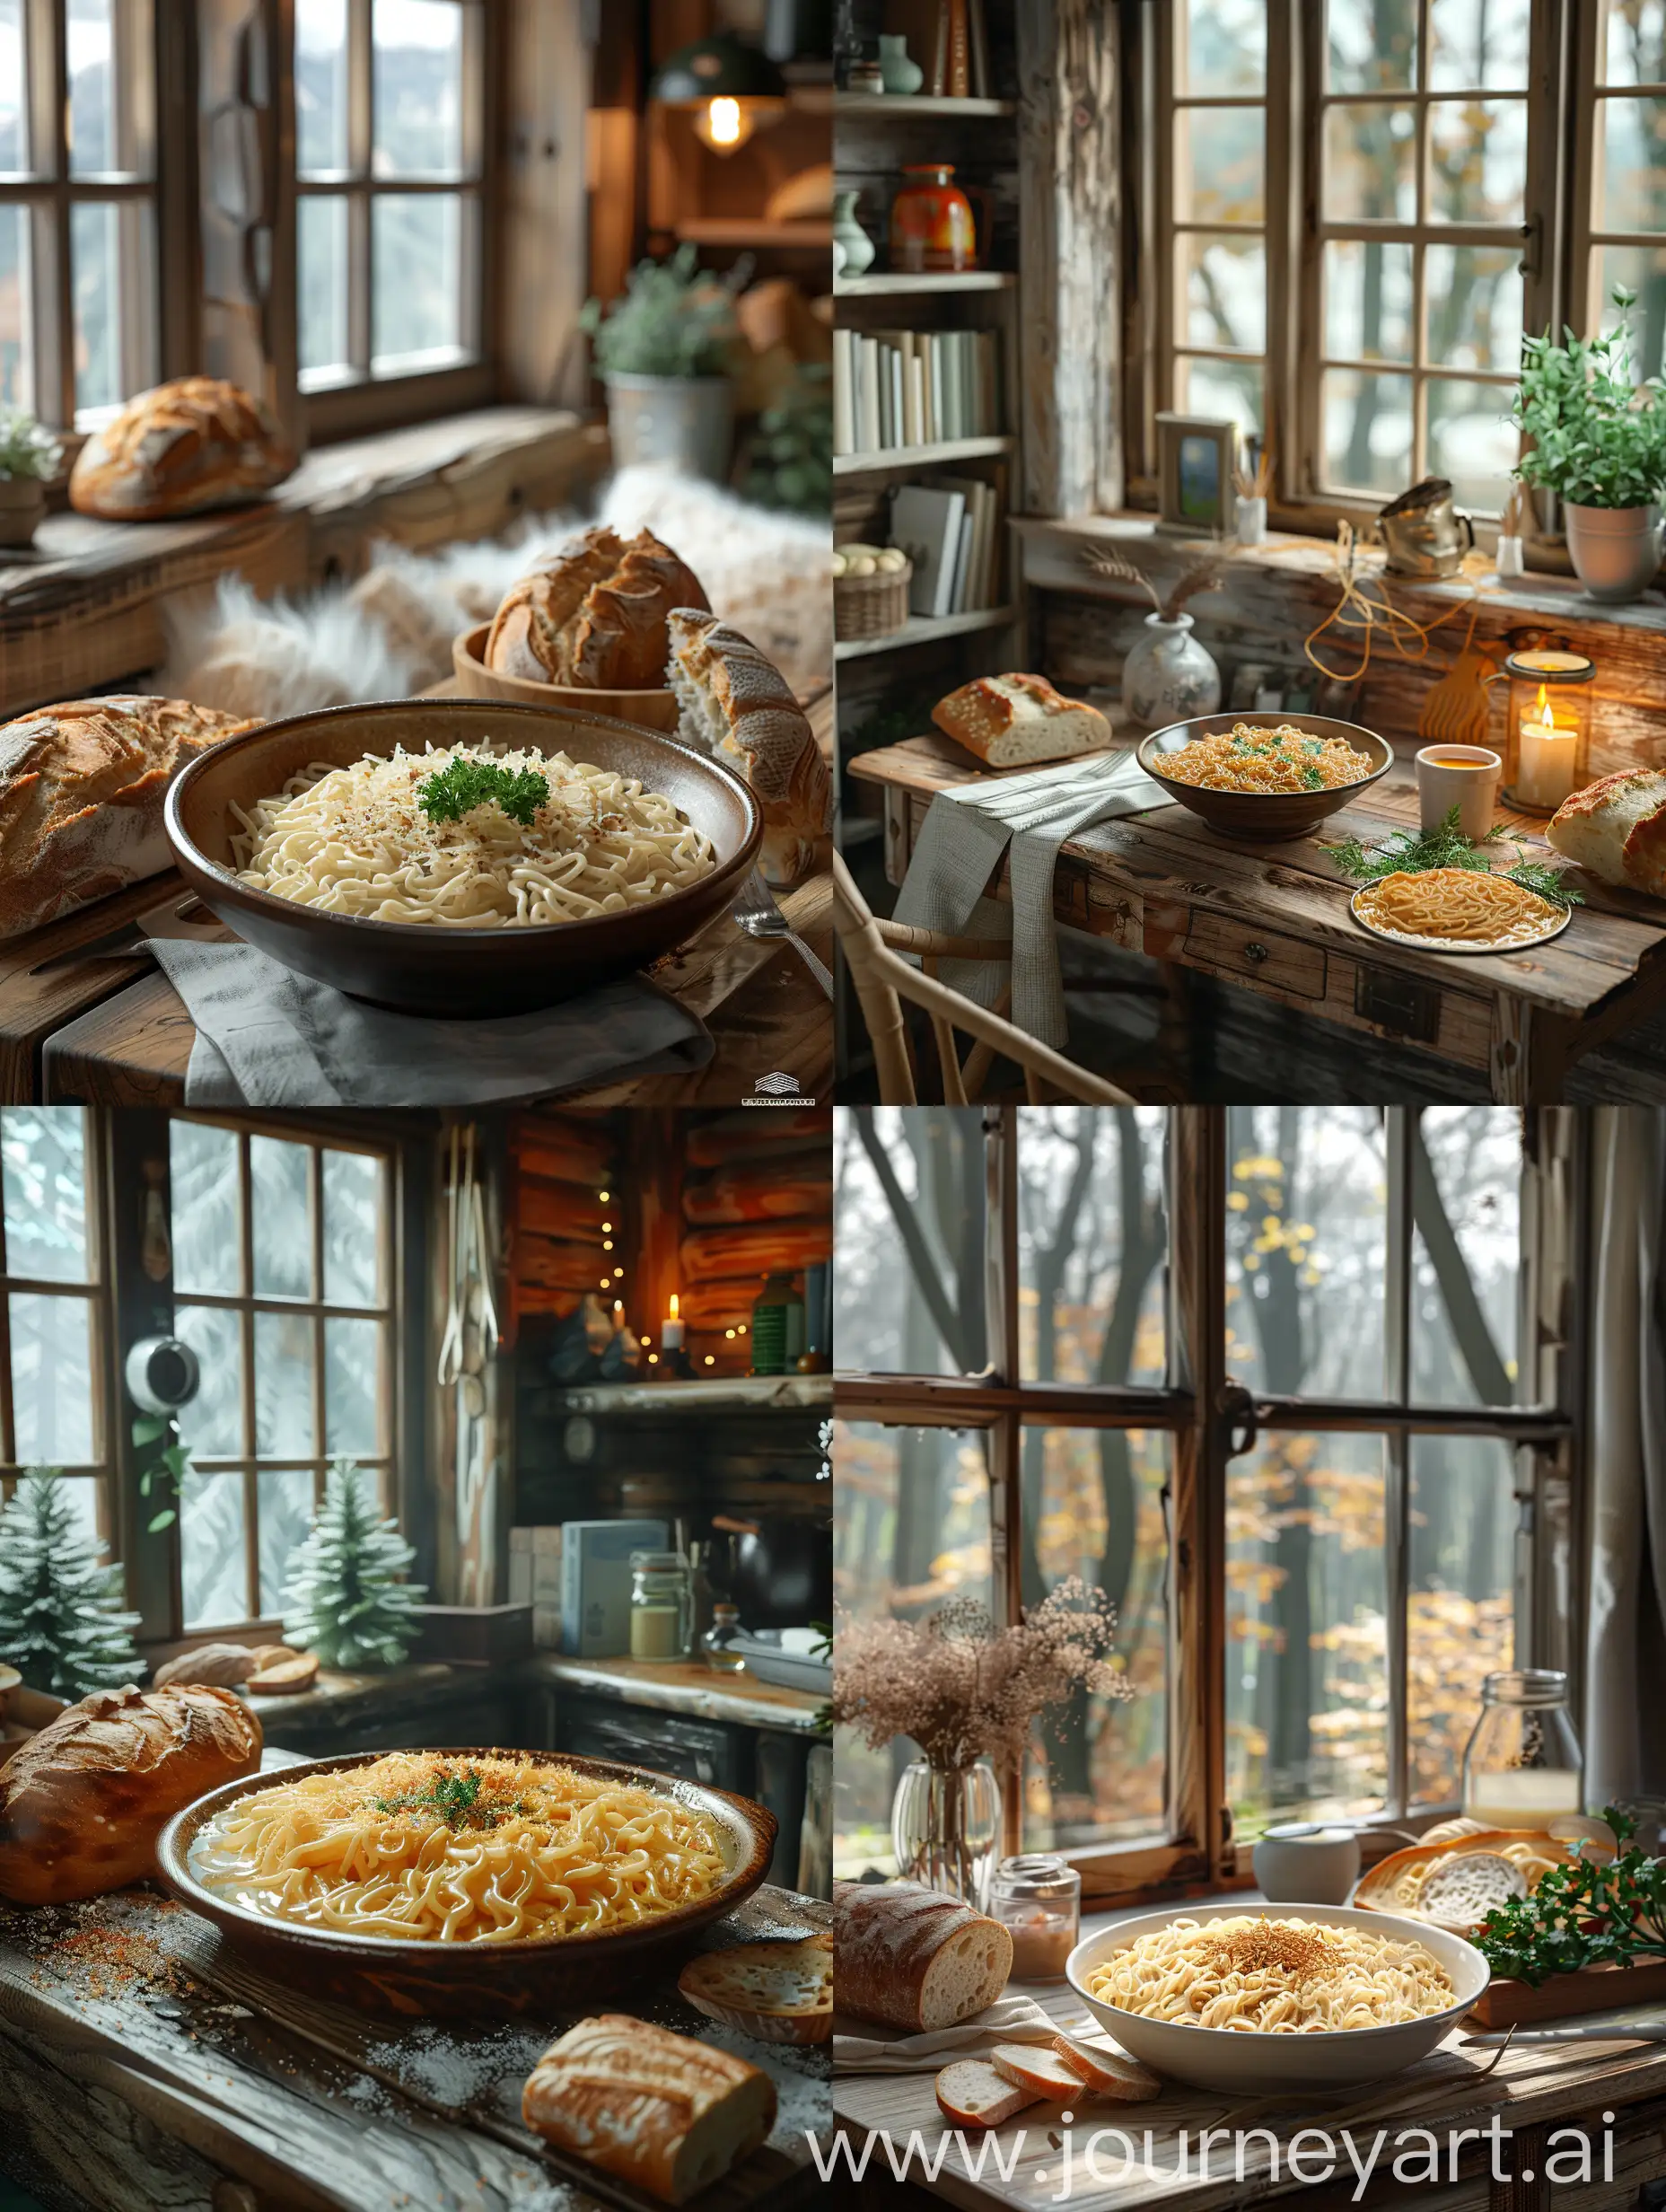 A realistic photo of a dish of handmade noodles on a wooden desk with fresh bread alongside it inside a cozy modern cabin. --s 750